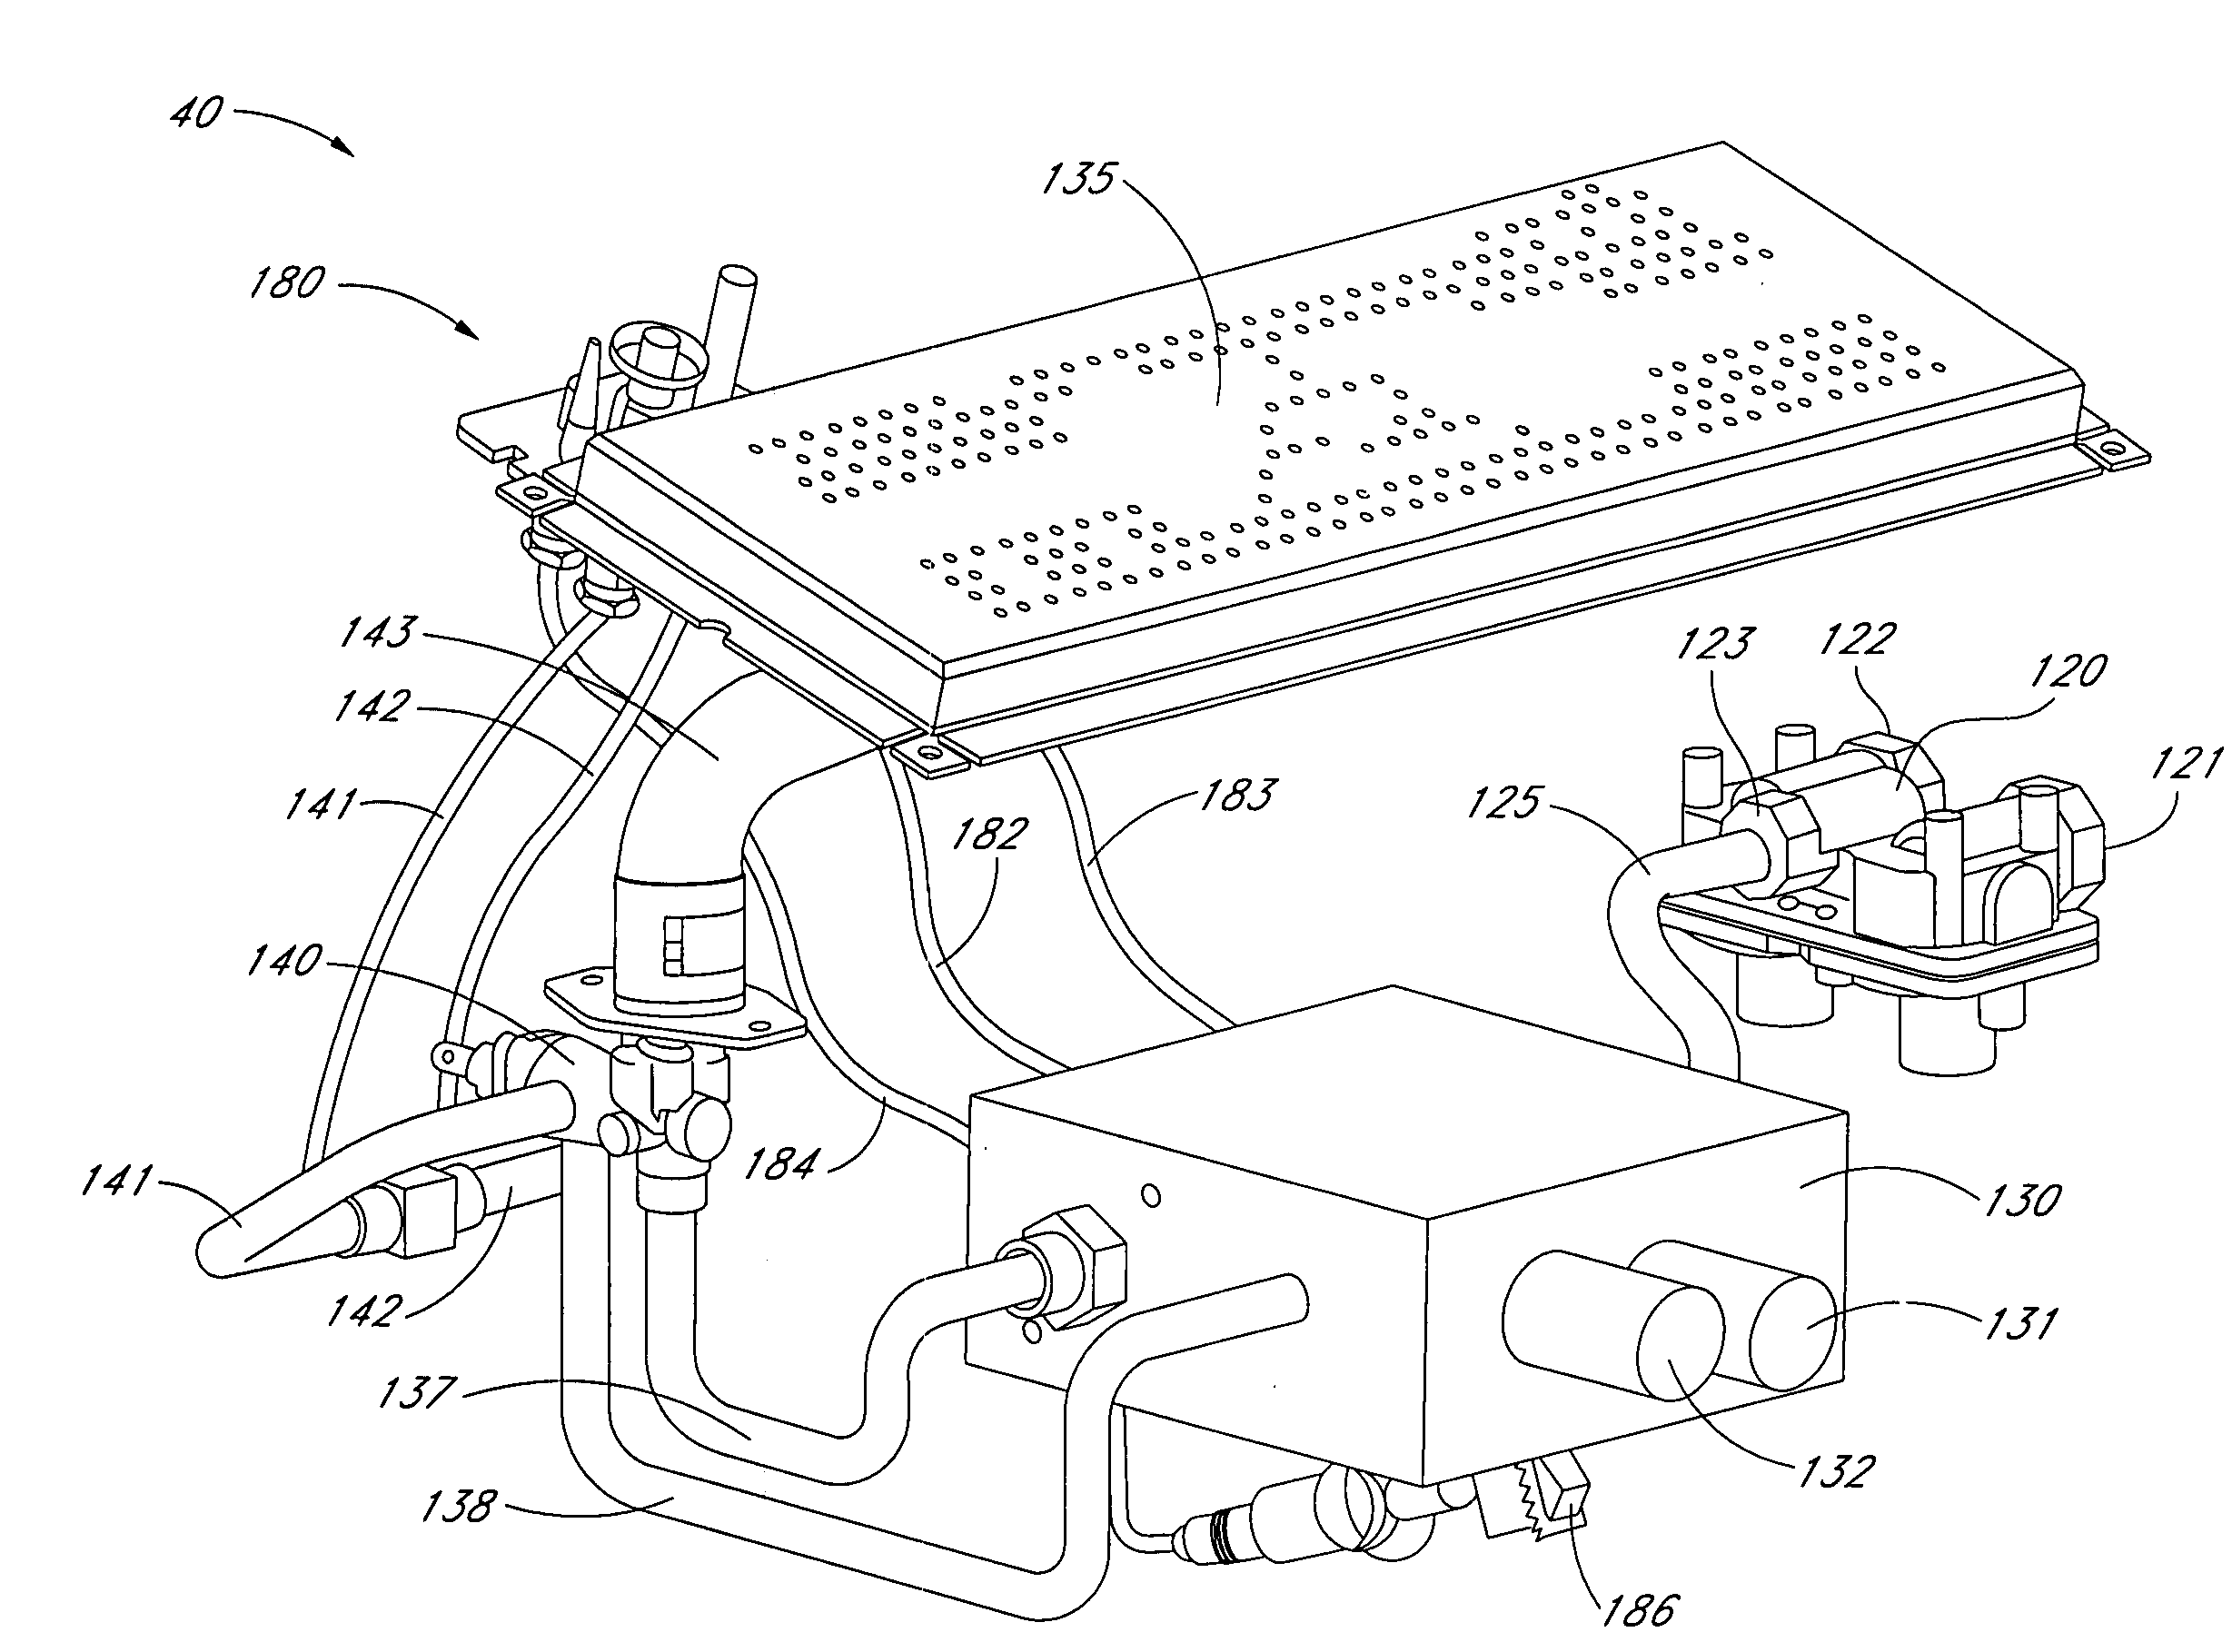 Valve assemblies for heating devices